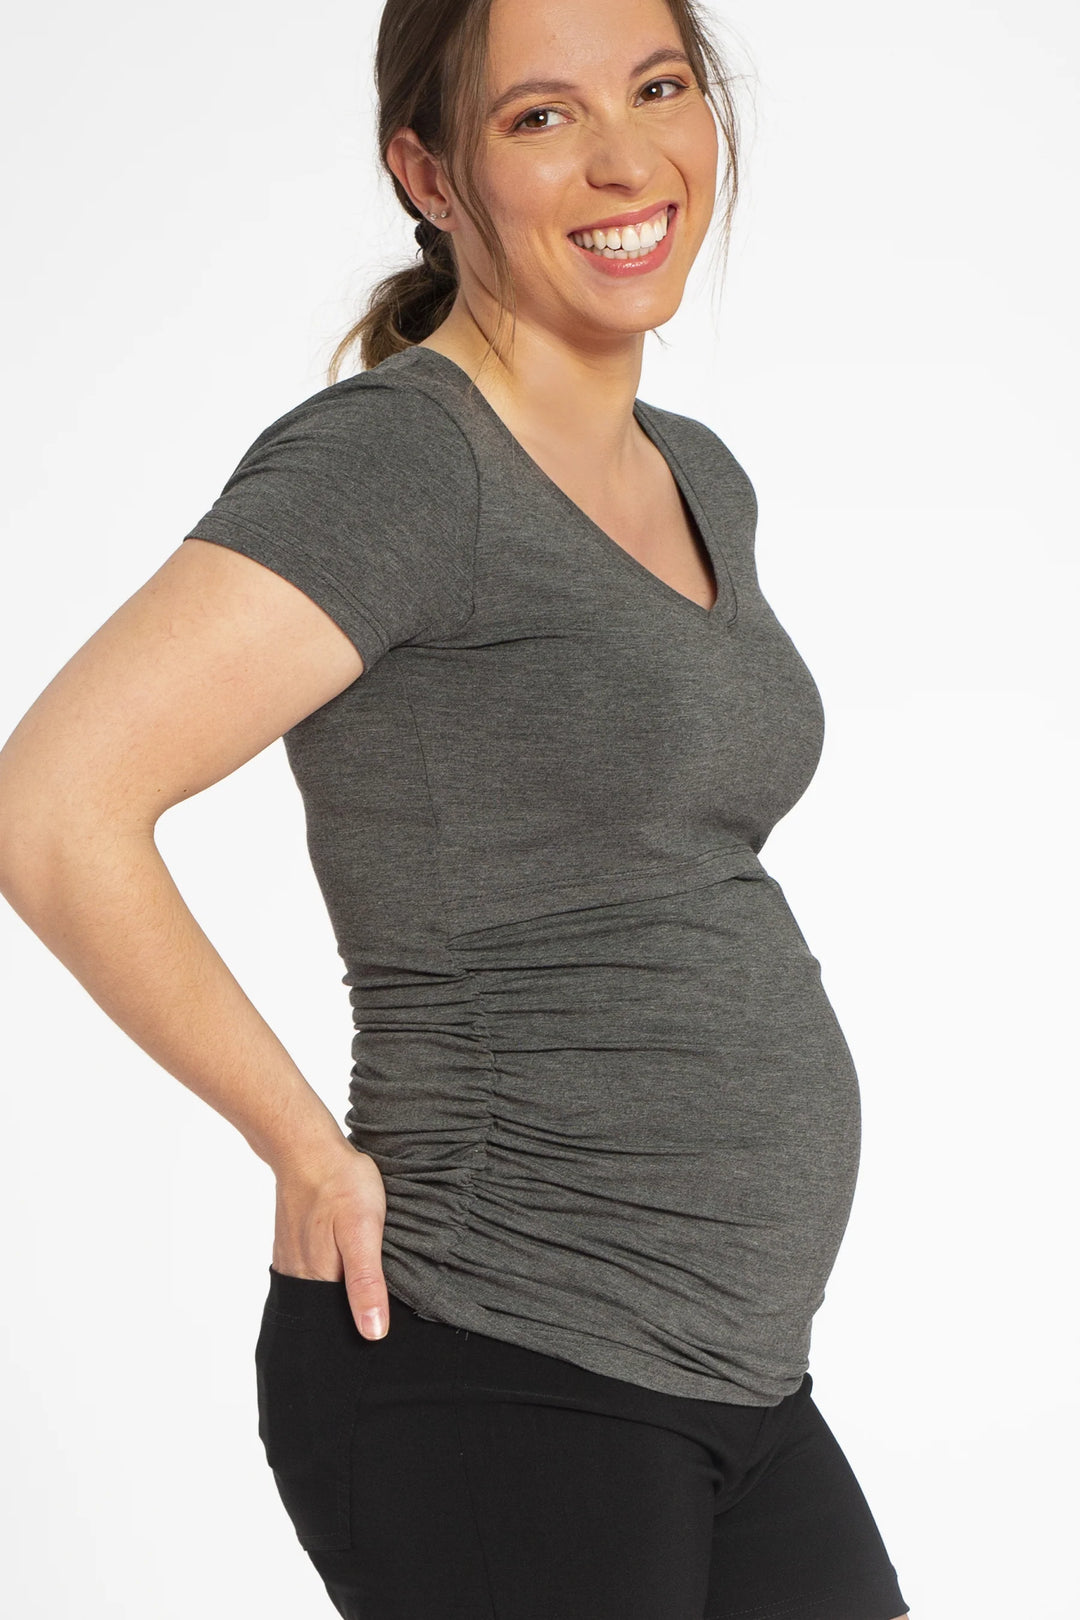 Maternity Clothing Collection, Stylish and Comfortable Pregnancy Wear